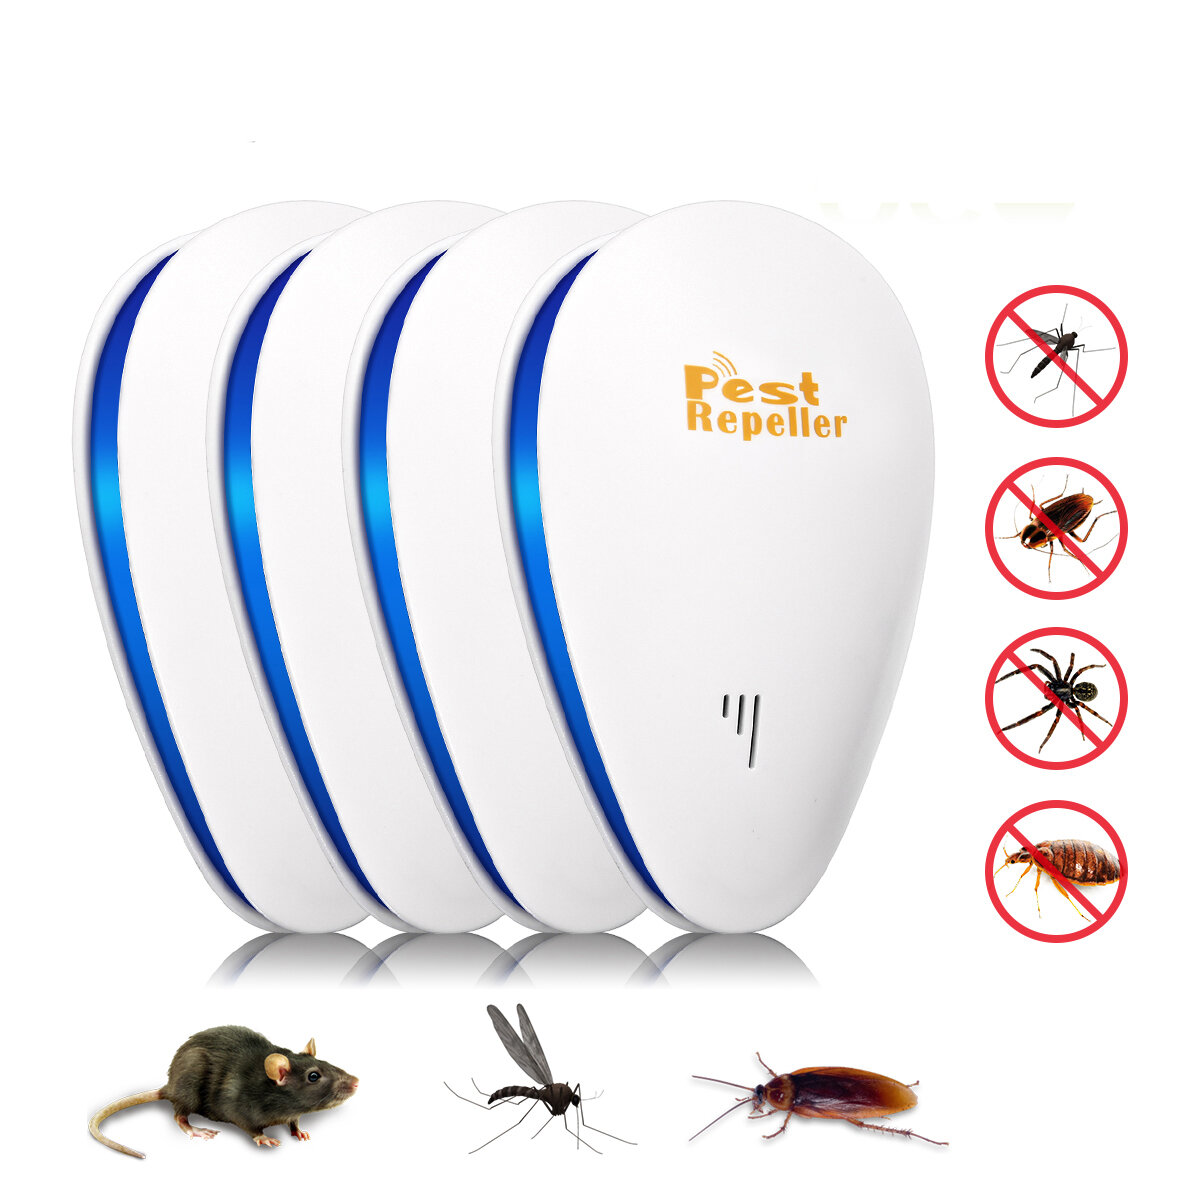 CHARMINER 4PCS Water droplet-shaped Ultrasonic Electronic Mosquito Repellent with Plug Frequency Repeller Cockroach Repe